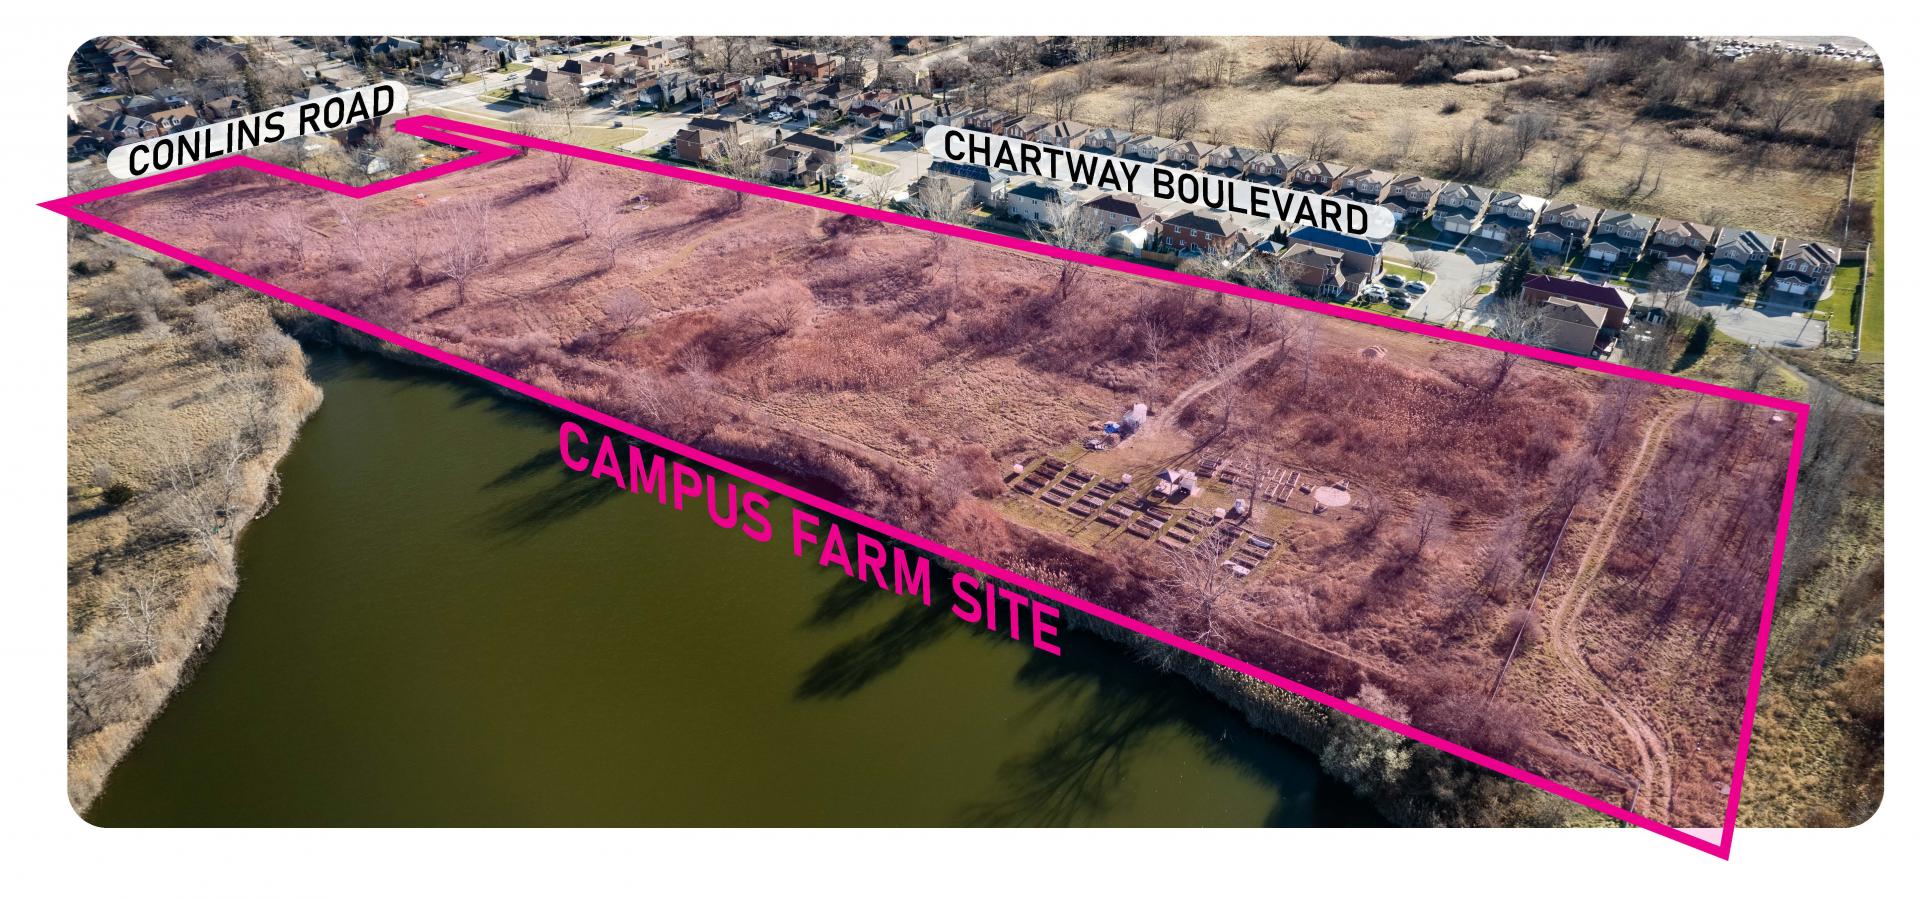 overhead view of campus farm property near Conlins Rd. and Chartway Blvd. with borders highlighted